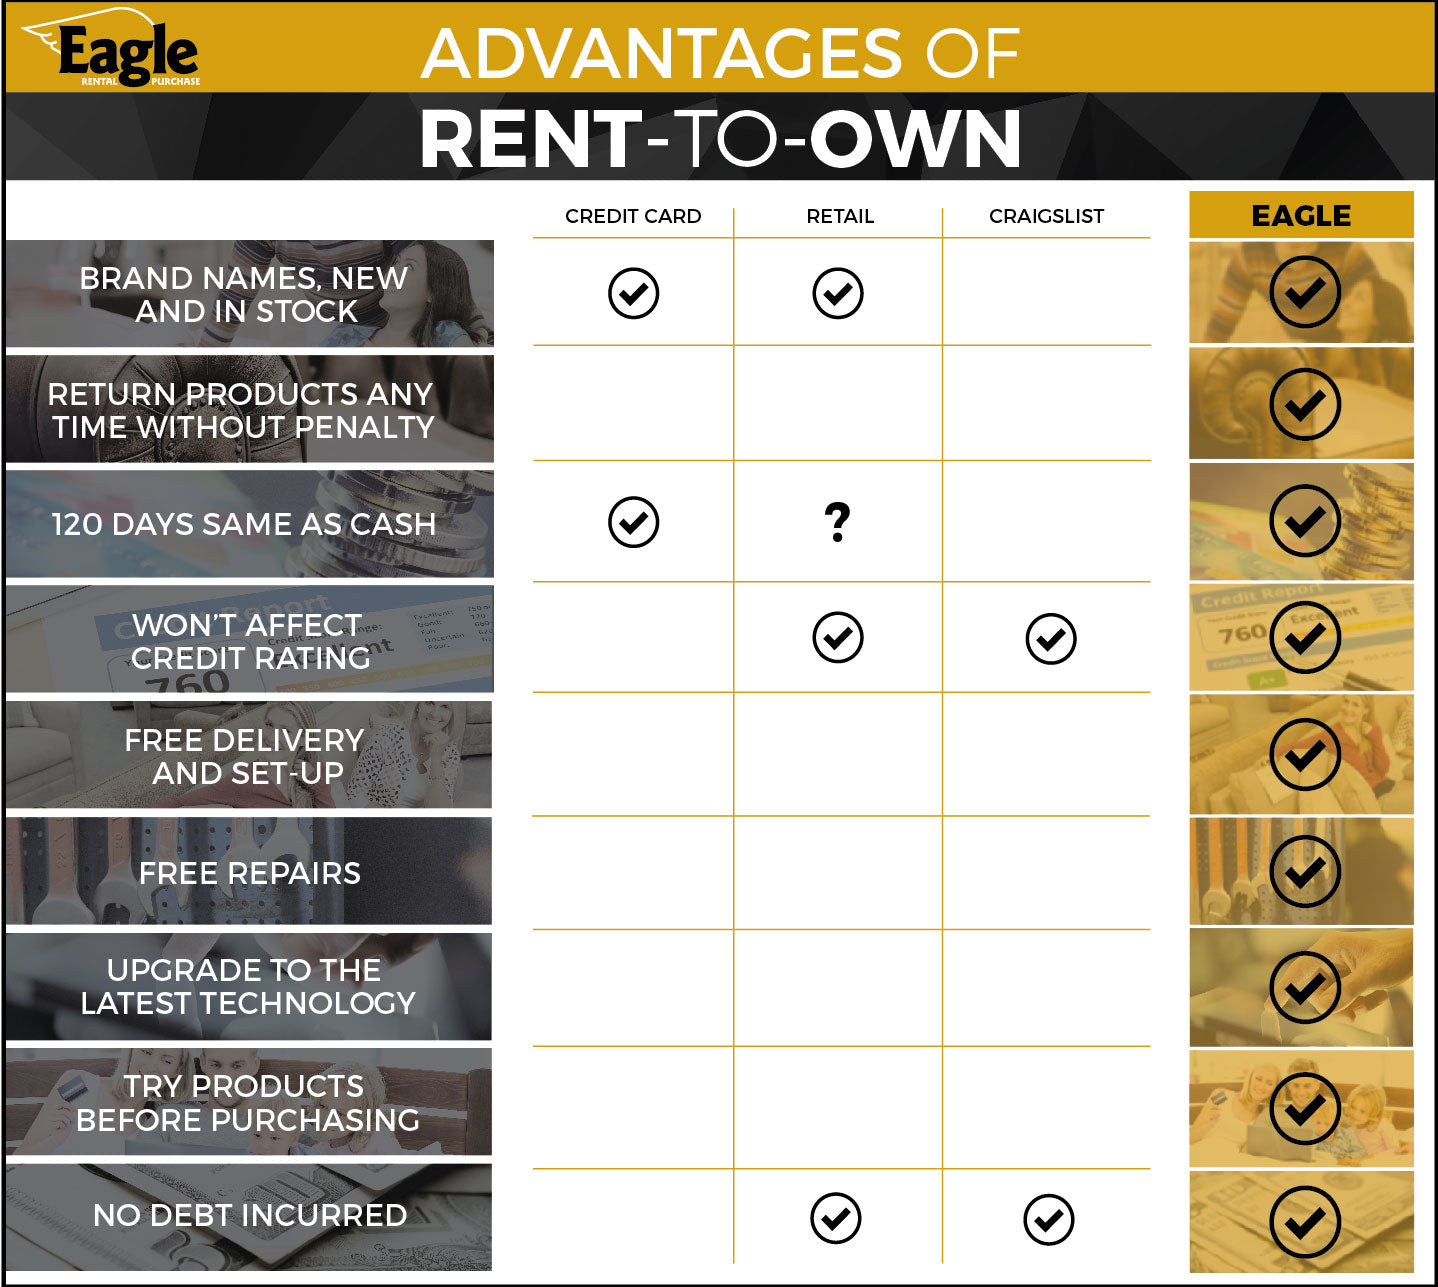 Advantages of Rent-to-own at Eagle Rental Purchase.